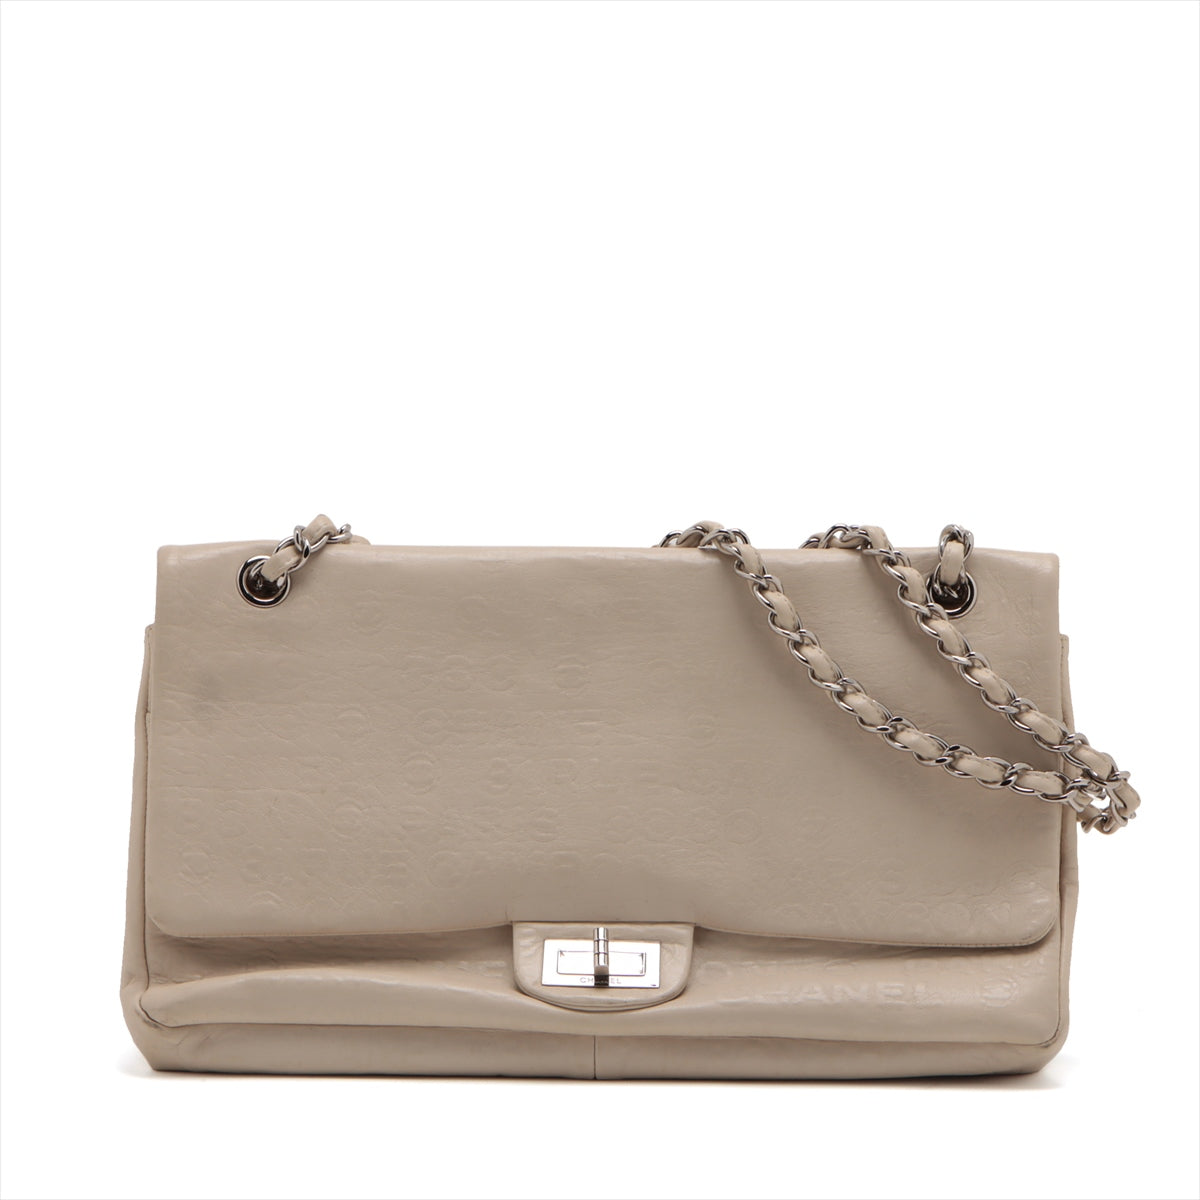 Chanel 2.55 Leather Double flap Double chain bag Beige Silver Metal fittings 12XXXXXX